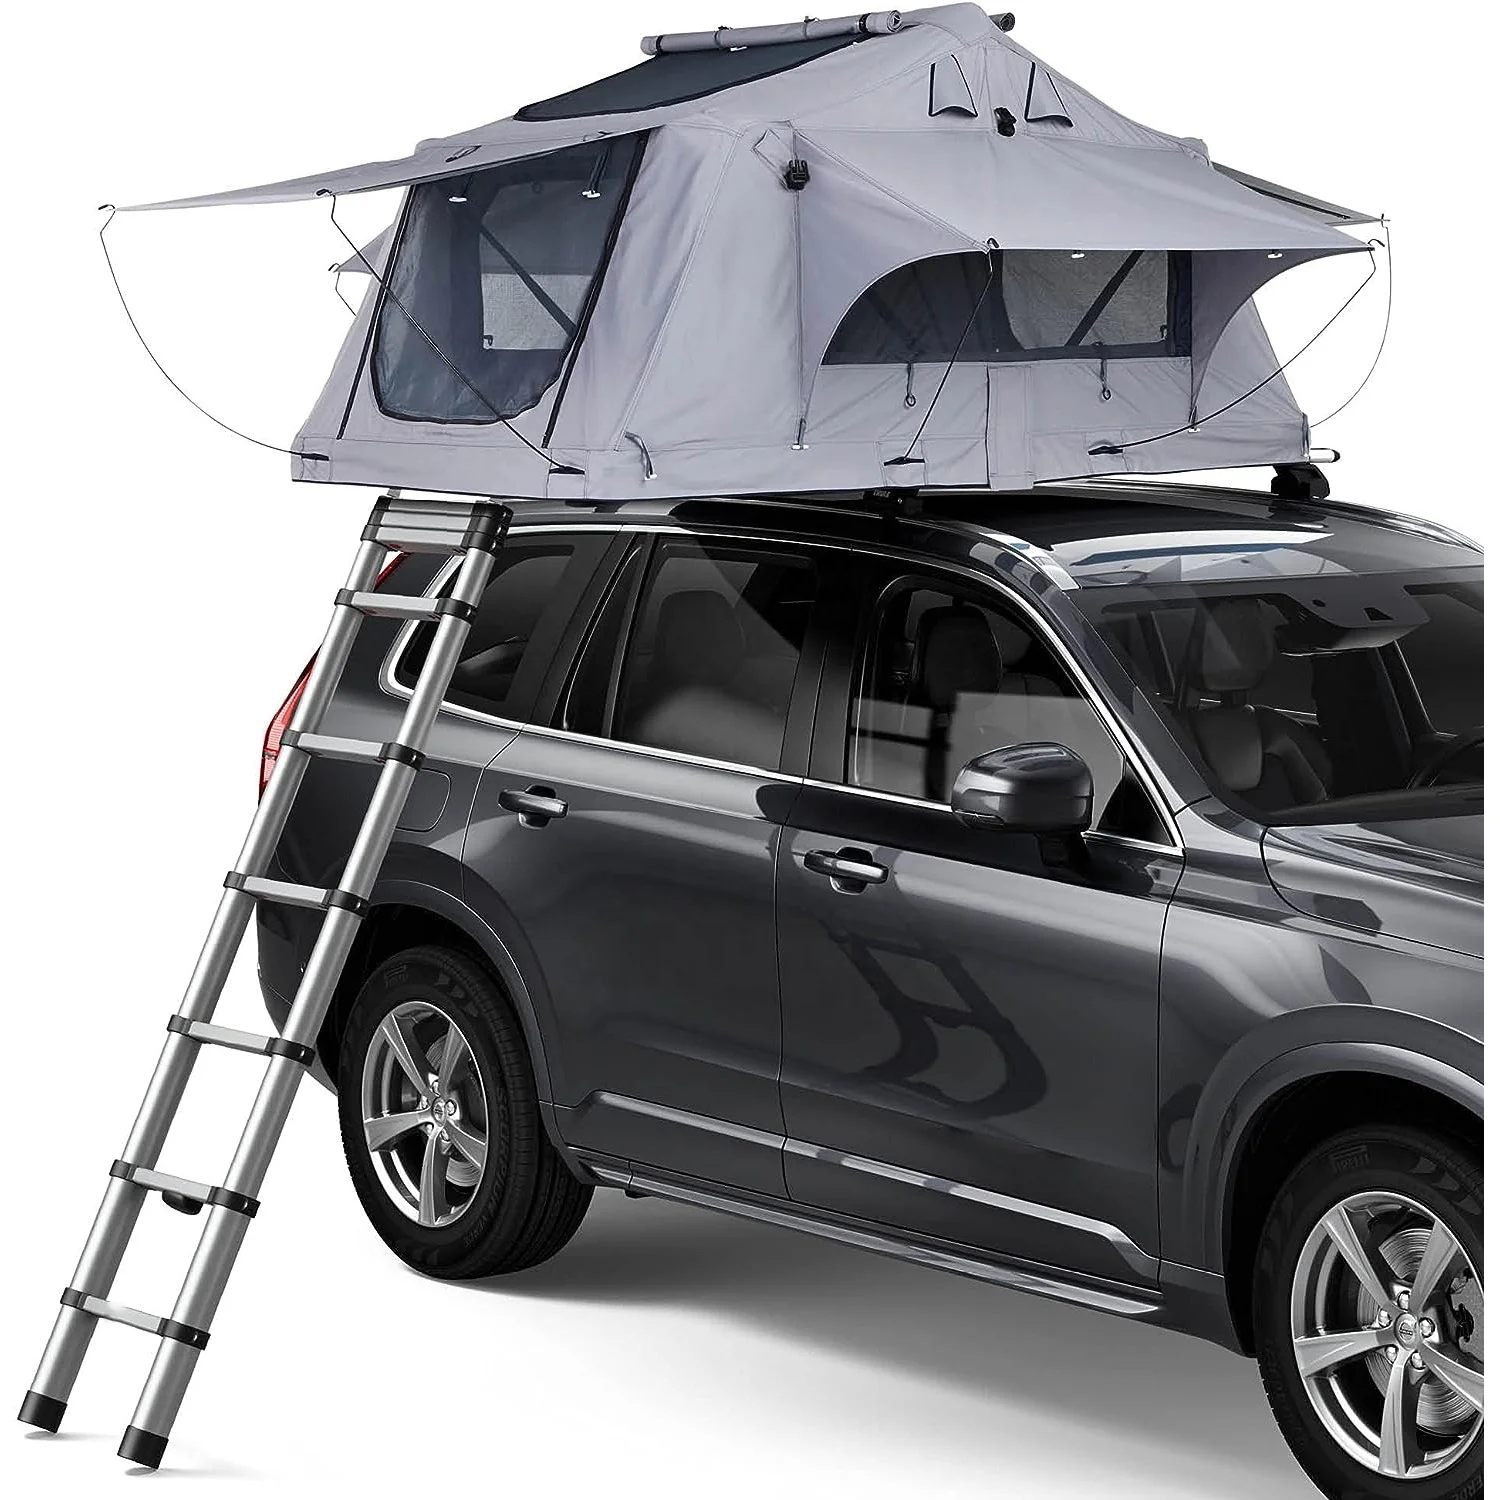 Hot Sale Soft Shell Car Foldable Camping Truck Rooftop Canvas Roof Top Tent ce certificate 2 3 person waterproof camping luxury outside hard shell abs car rooftop tent car roof tent